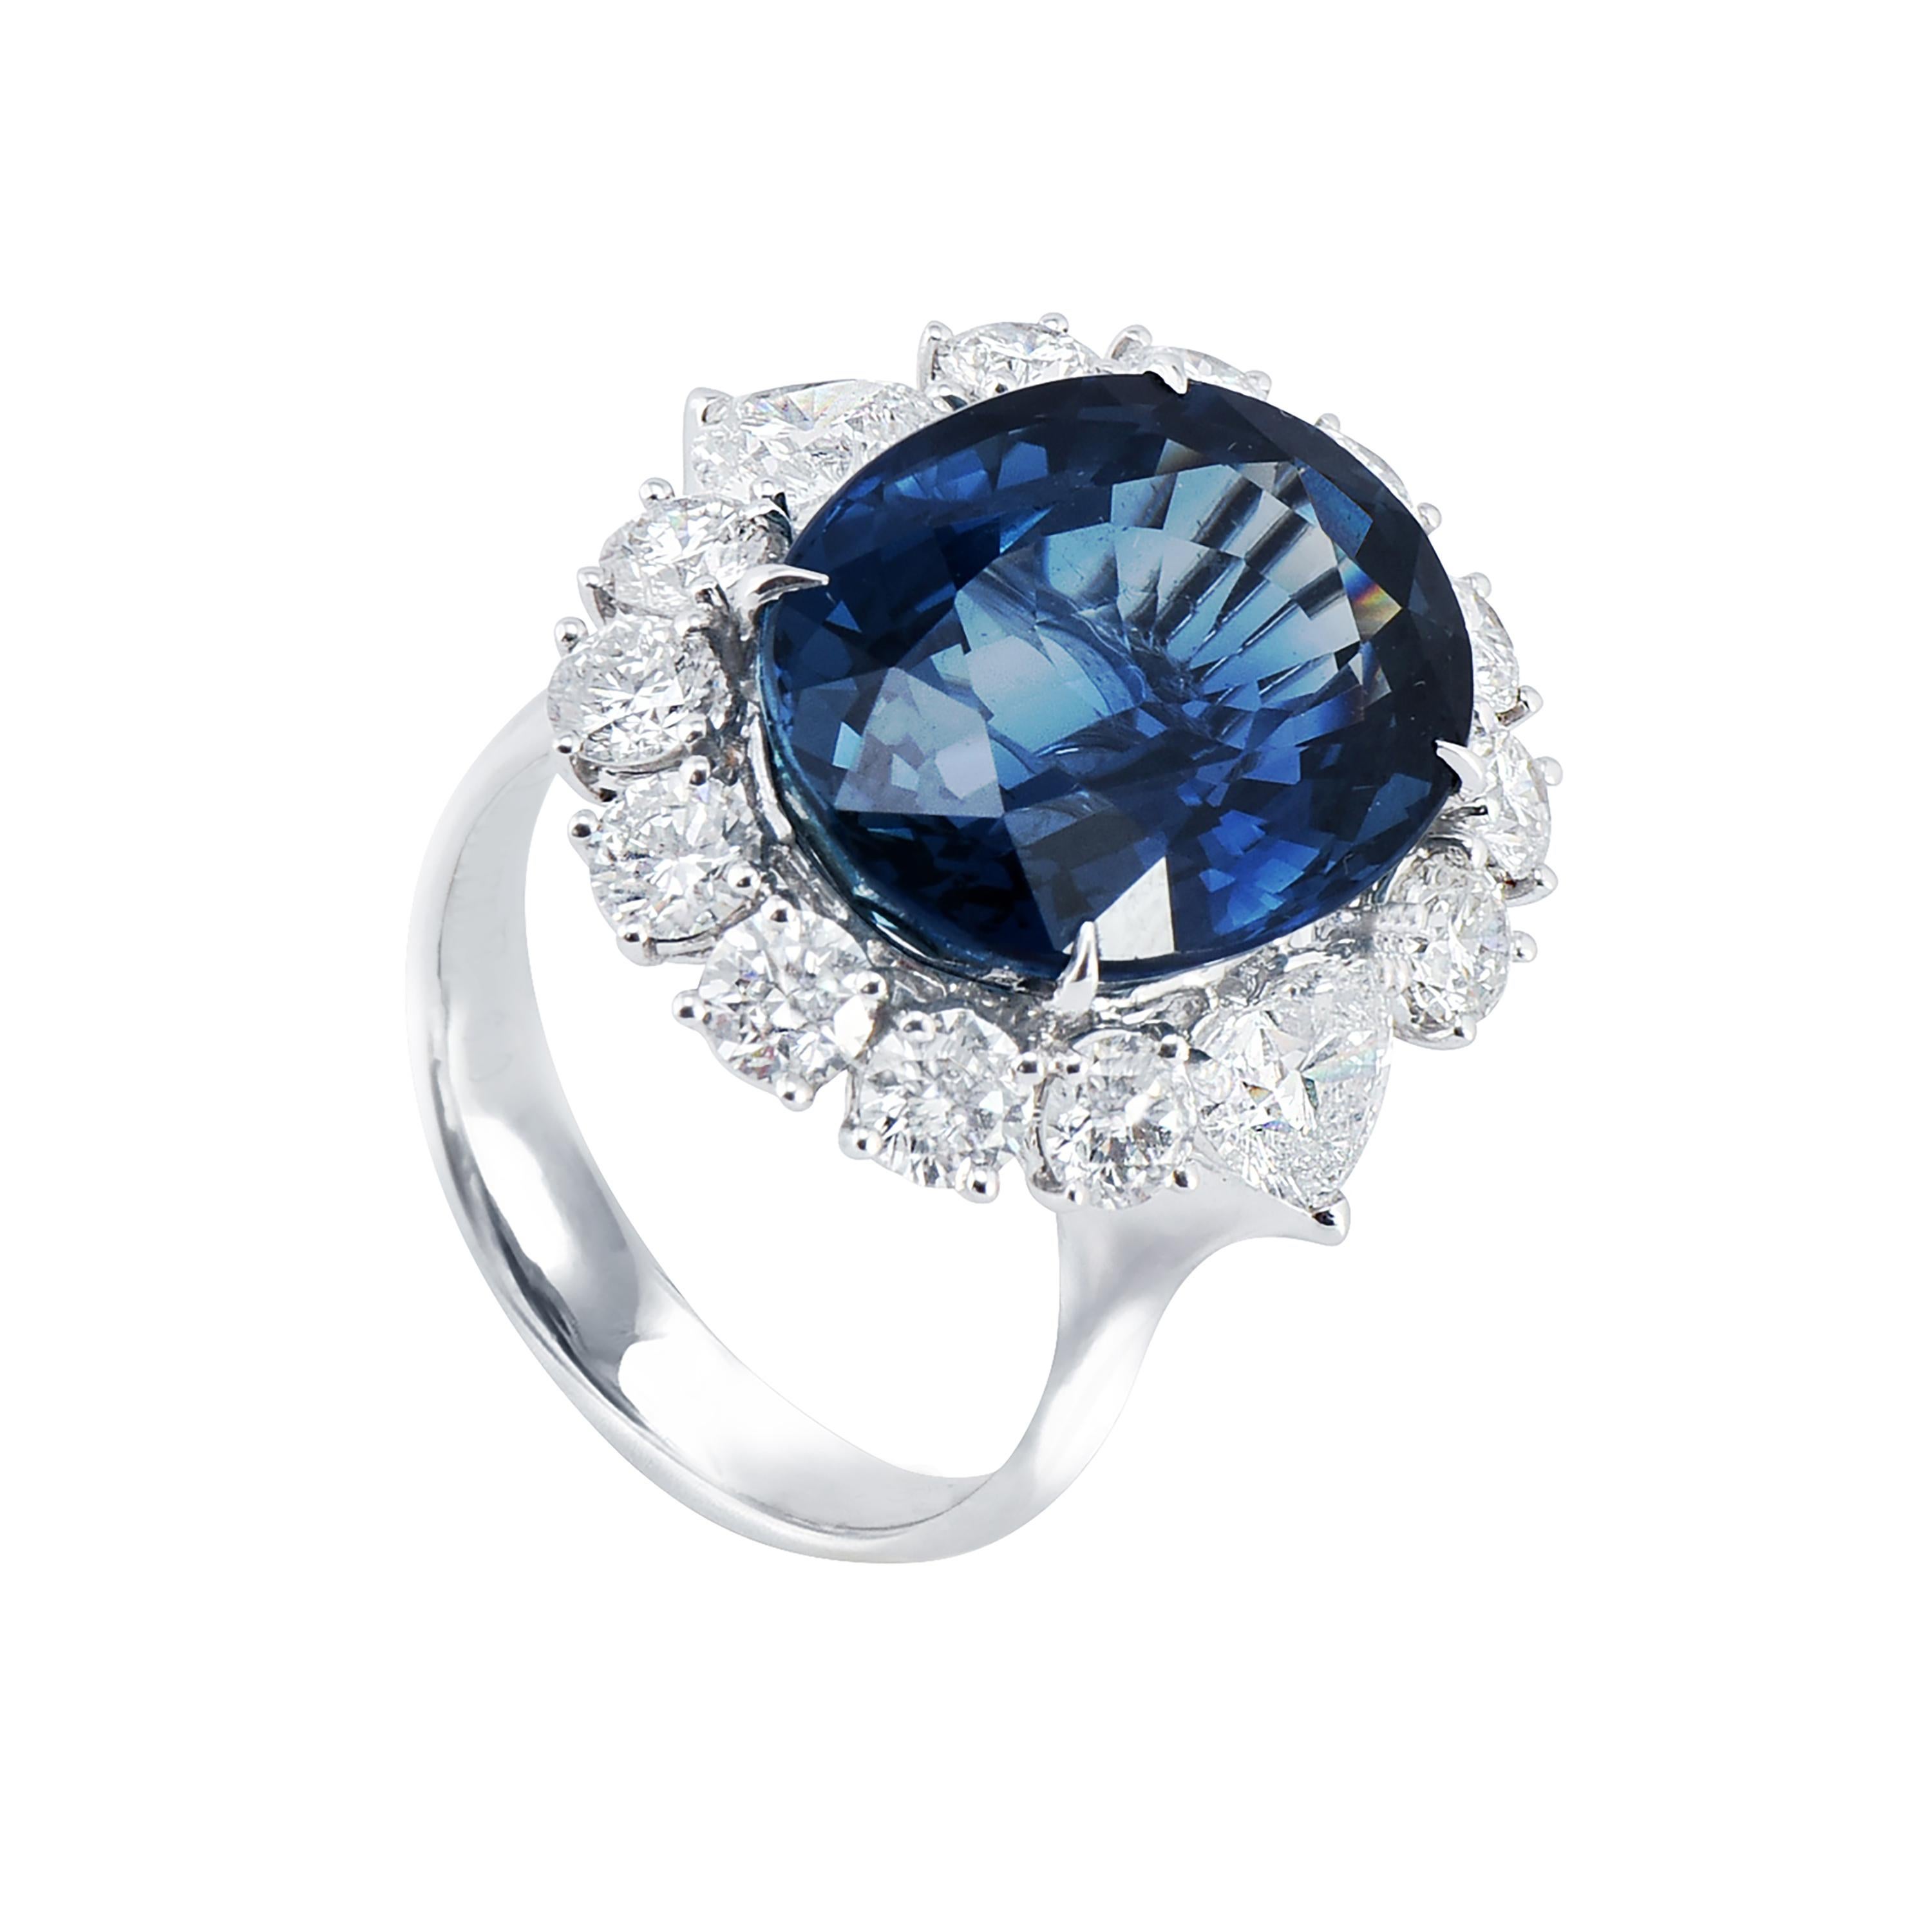 18 karat white gold blue sapphire cocktail ring from the Royal Blue collection of Laviere. The ring is set with a GIA certified 15.12 carats oval shape blue sapphire in the center surrounded by 1.95 carats round brilliant diamonds and two heart